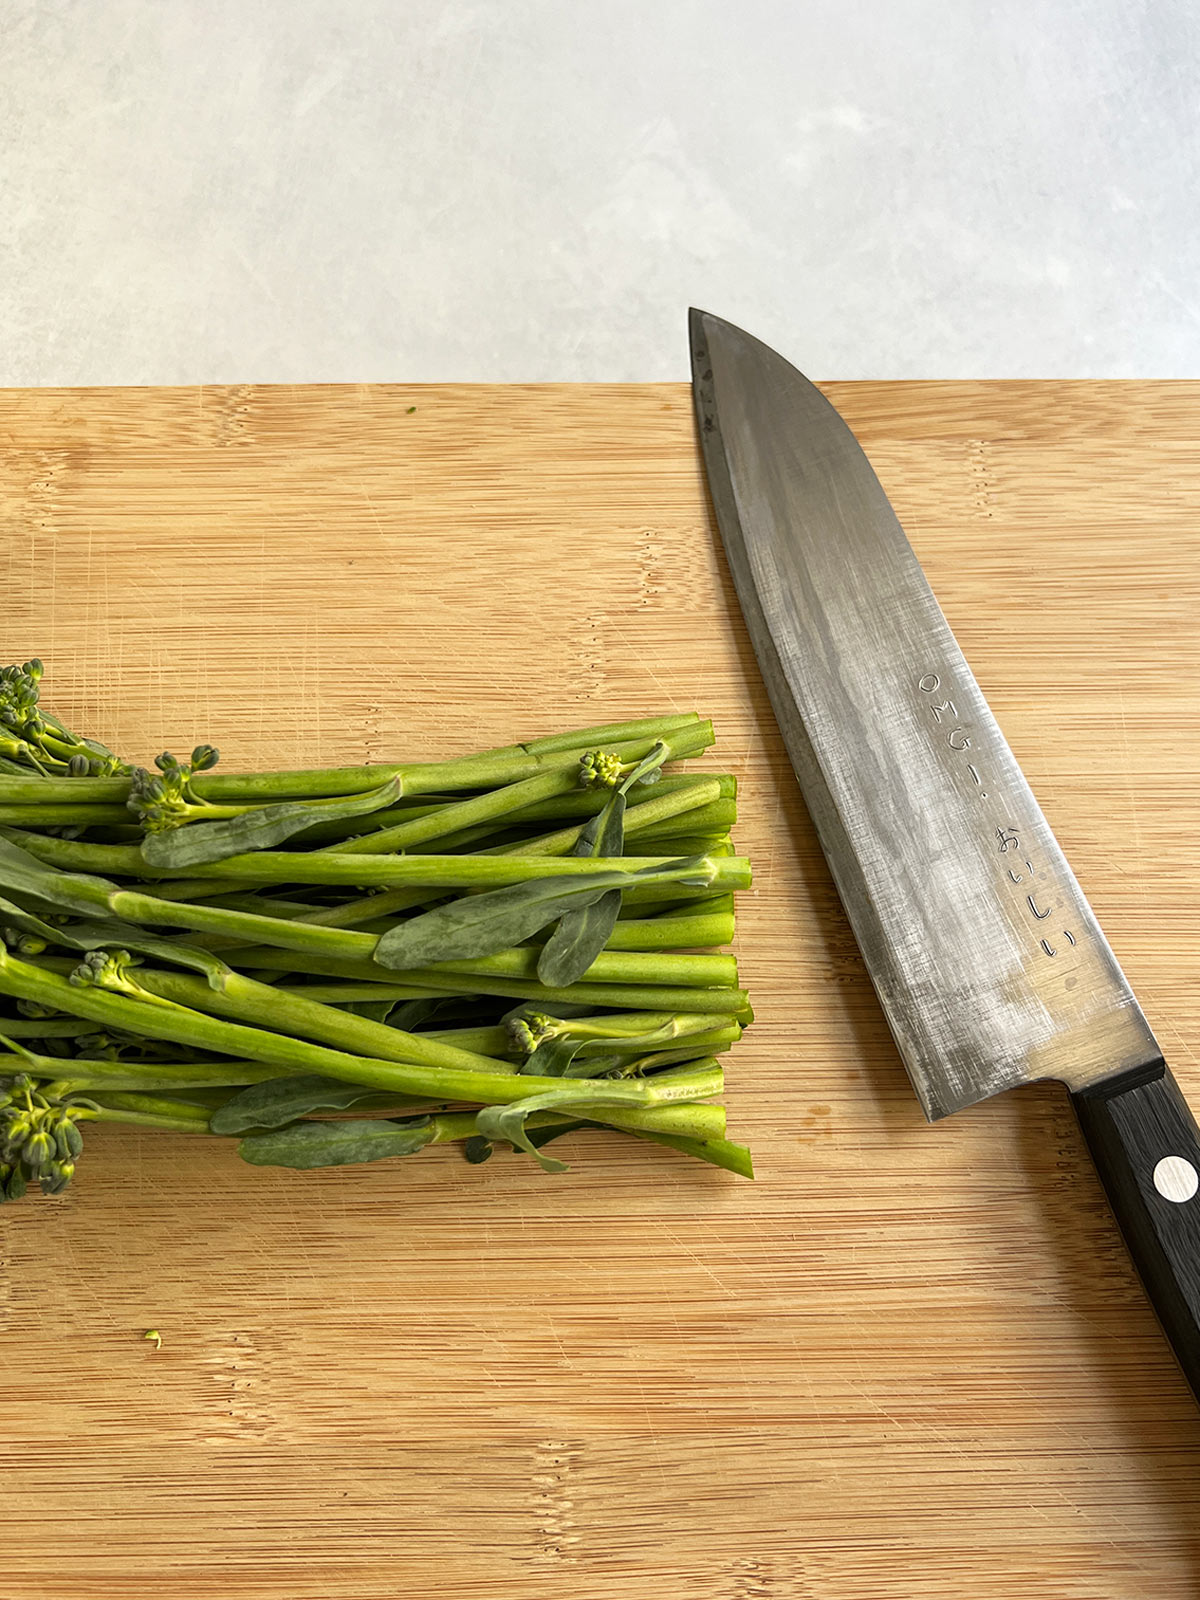 Broccolini on a wooden cutting board with a Japanese knife to cut the stalk ends.